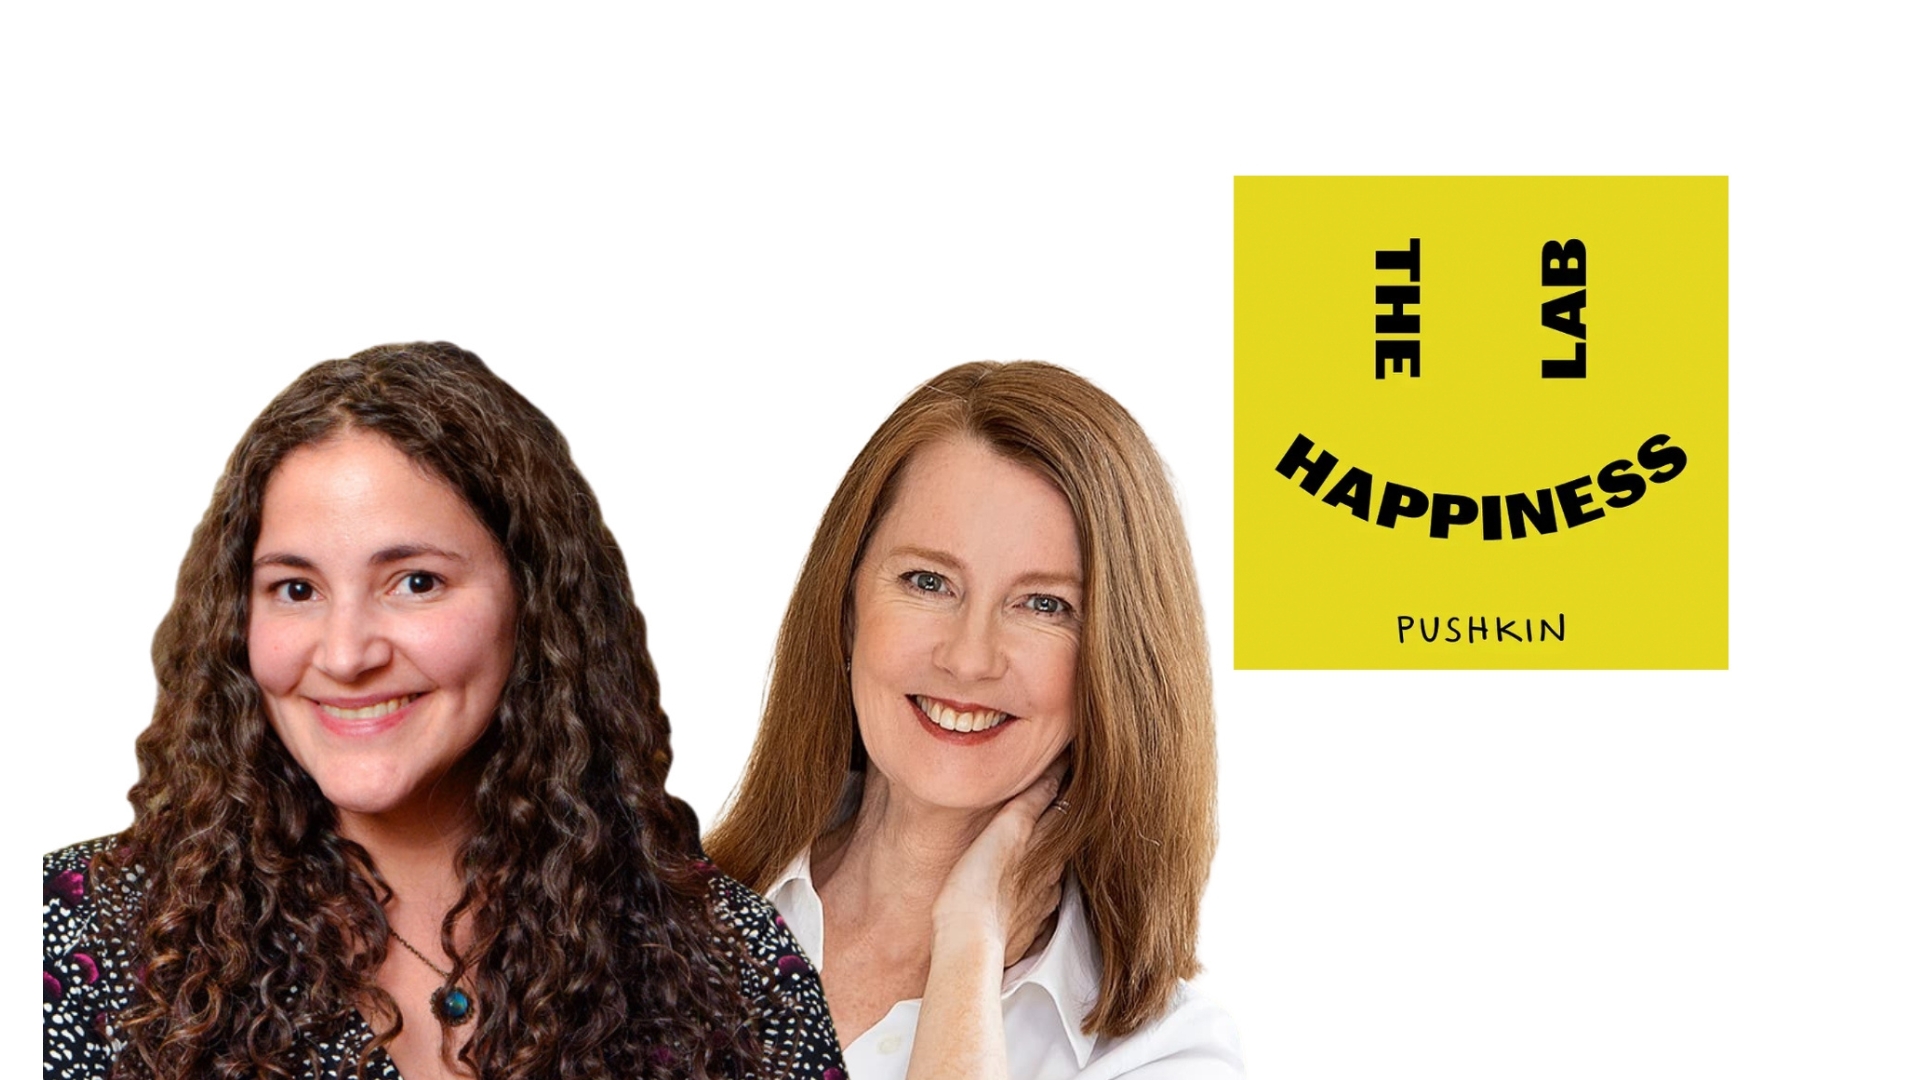 May 7 // The Happiness Lab Featuring Special Guest Gretchen Rubin